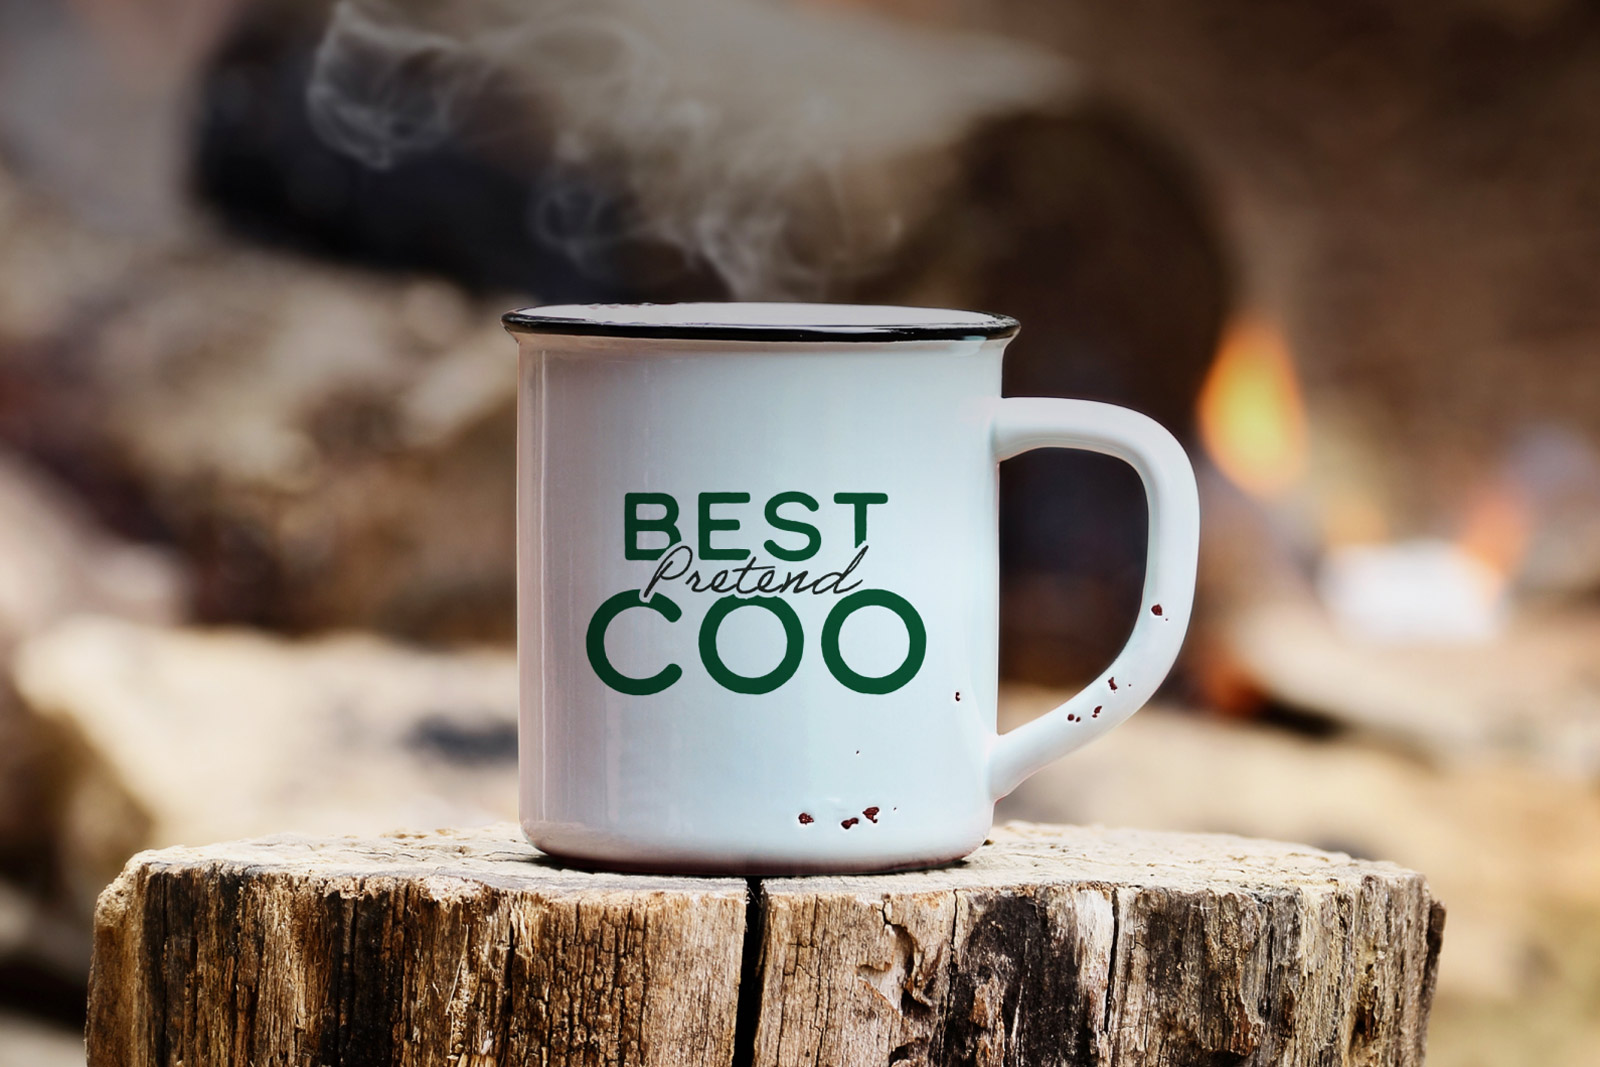 Apply for the three month "Summer COO" job and enjoy 12 weeks of PTO at top campgrounds across the US